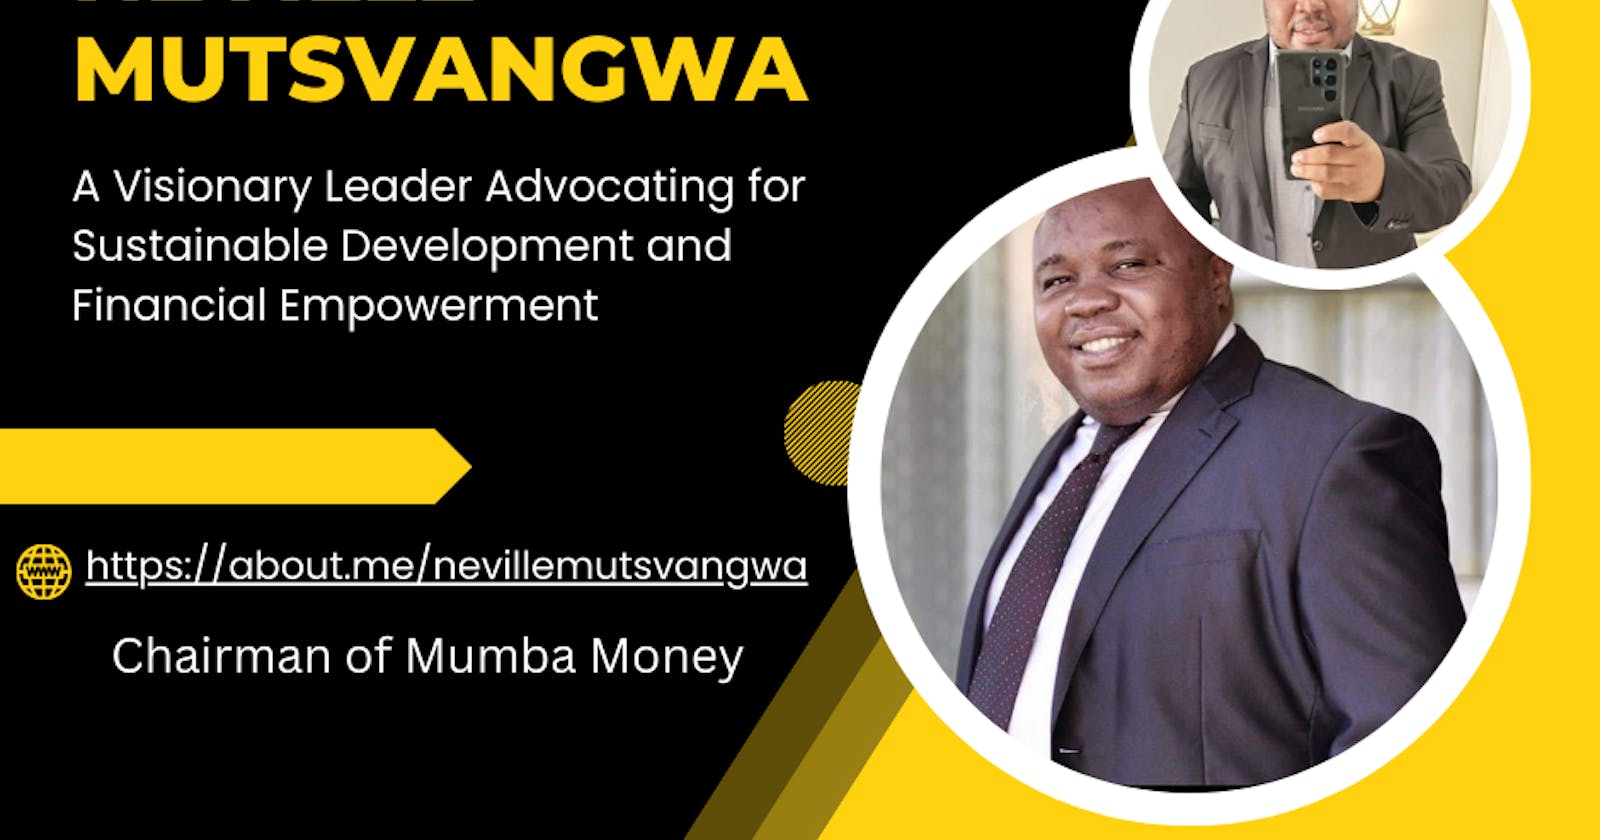 Neville Mutsvangwa: A Visionary Leader Spearheading Sustainable Development and Financial Empowerment